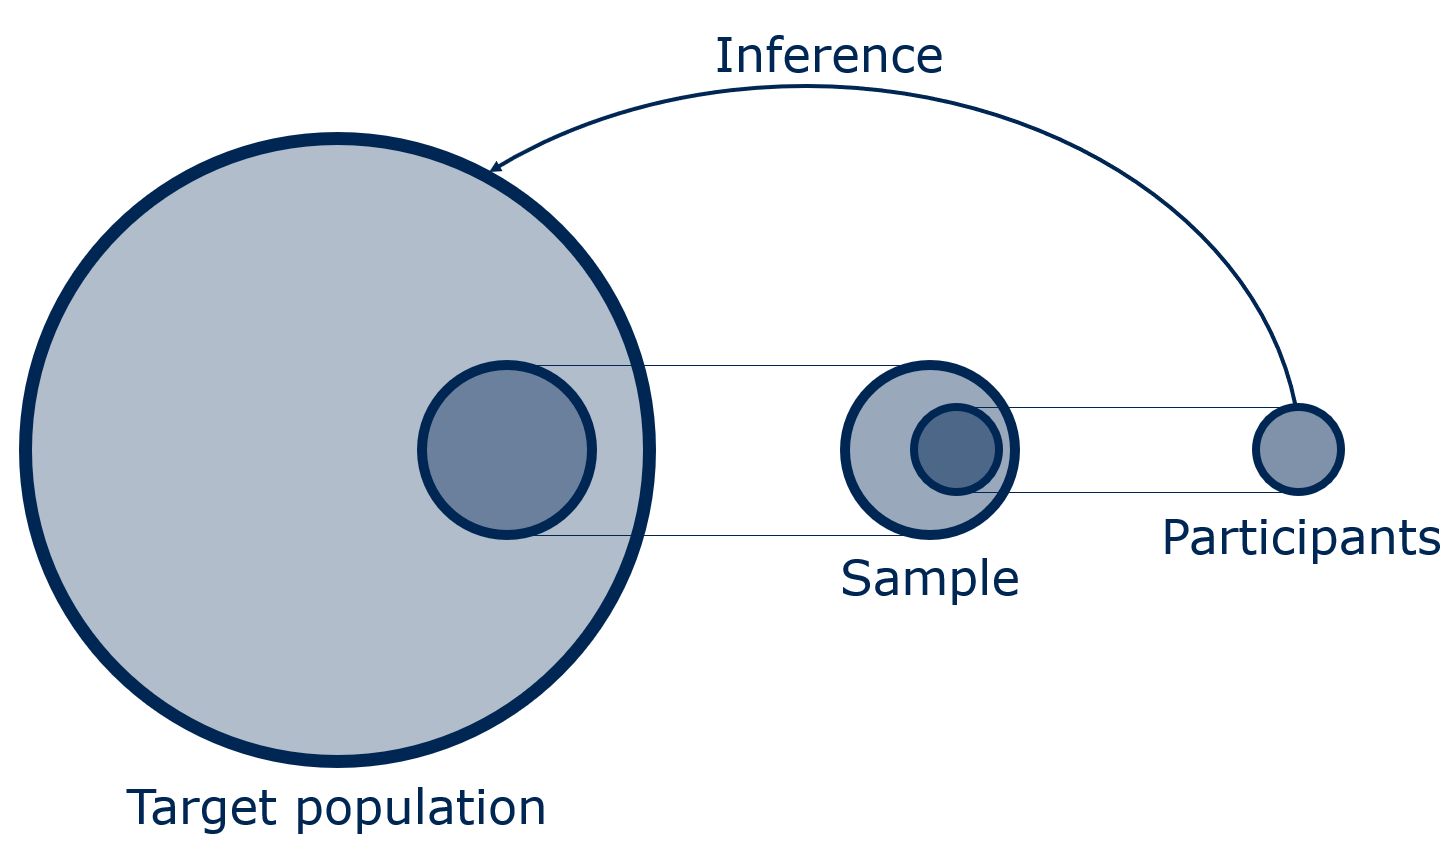 Inference from participants in a study to the target population